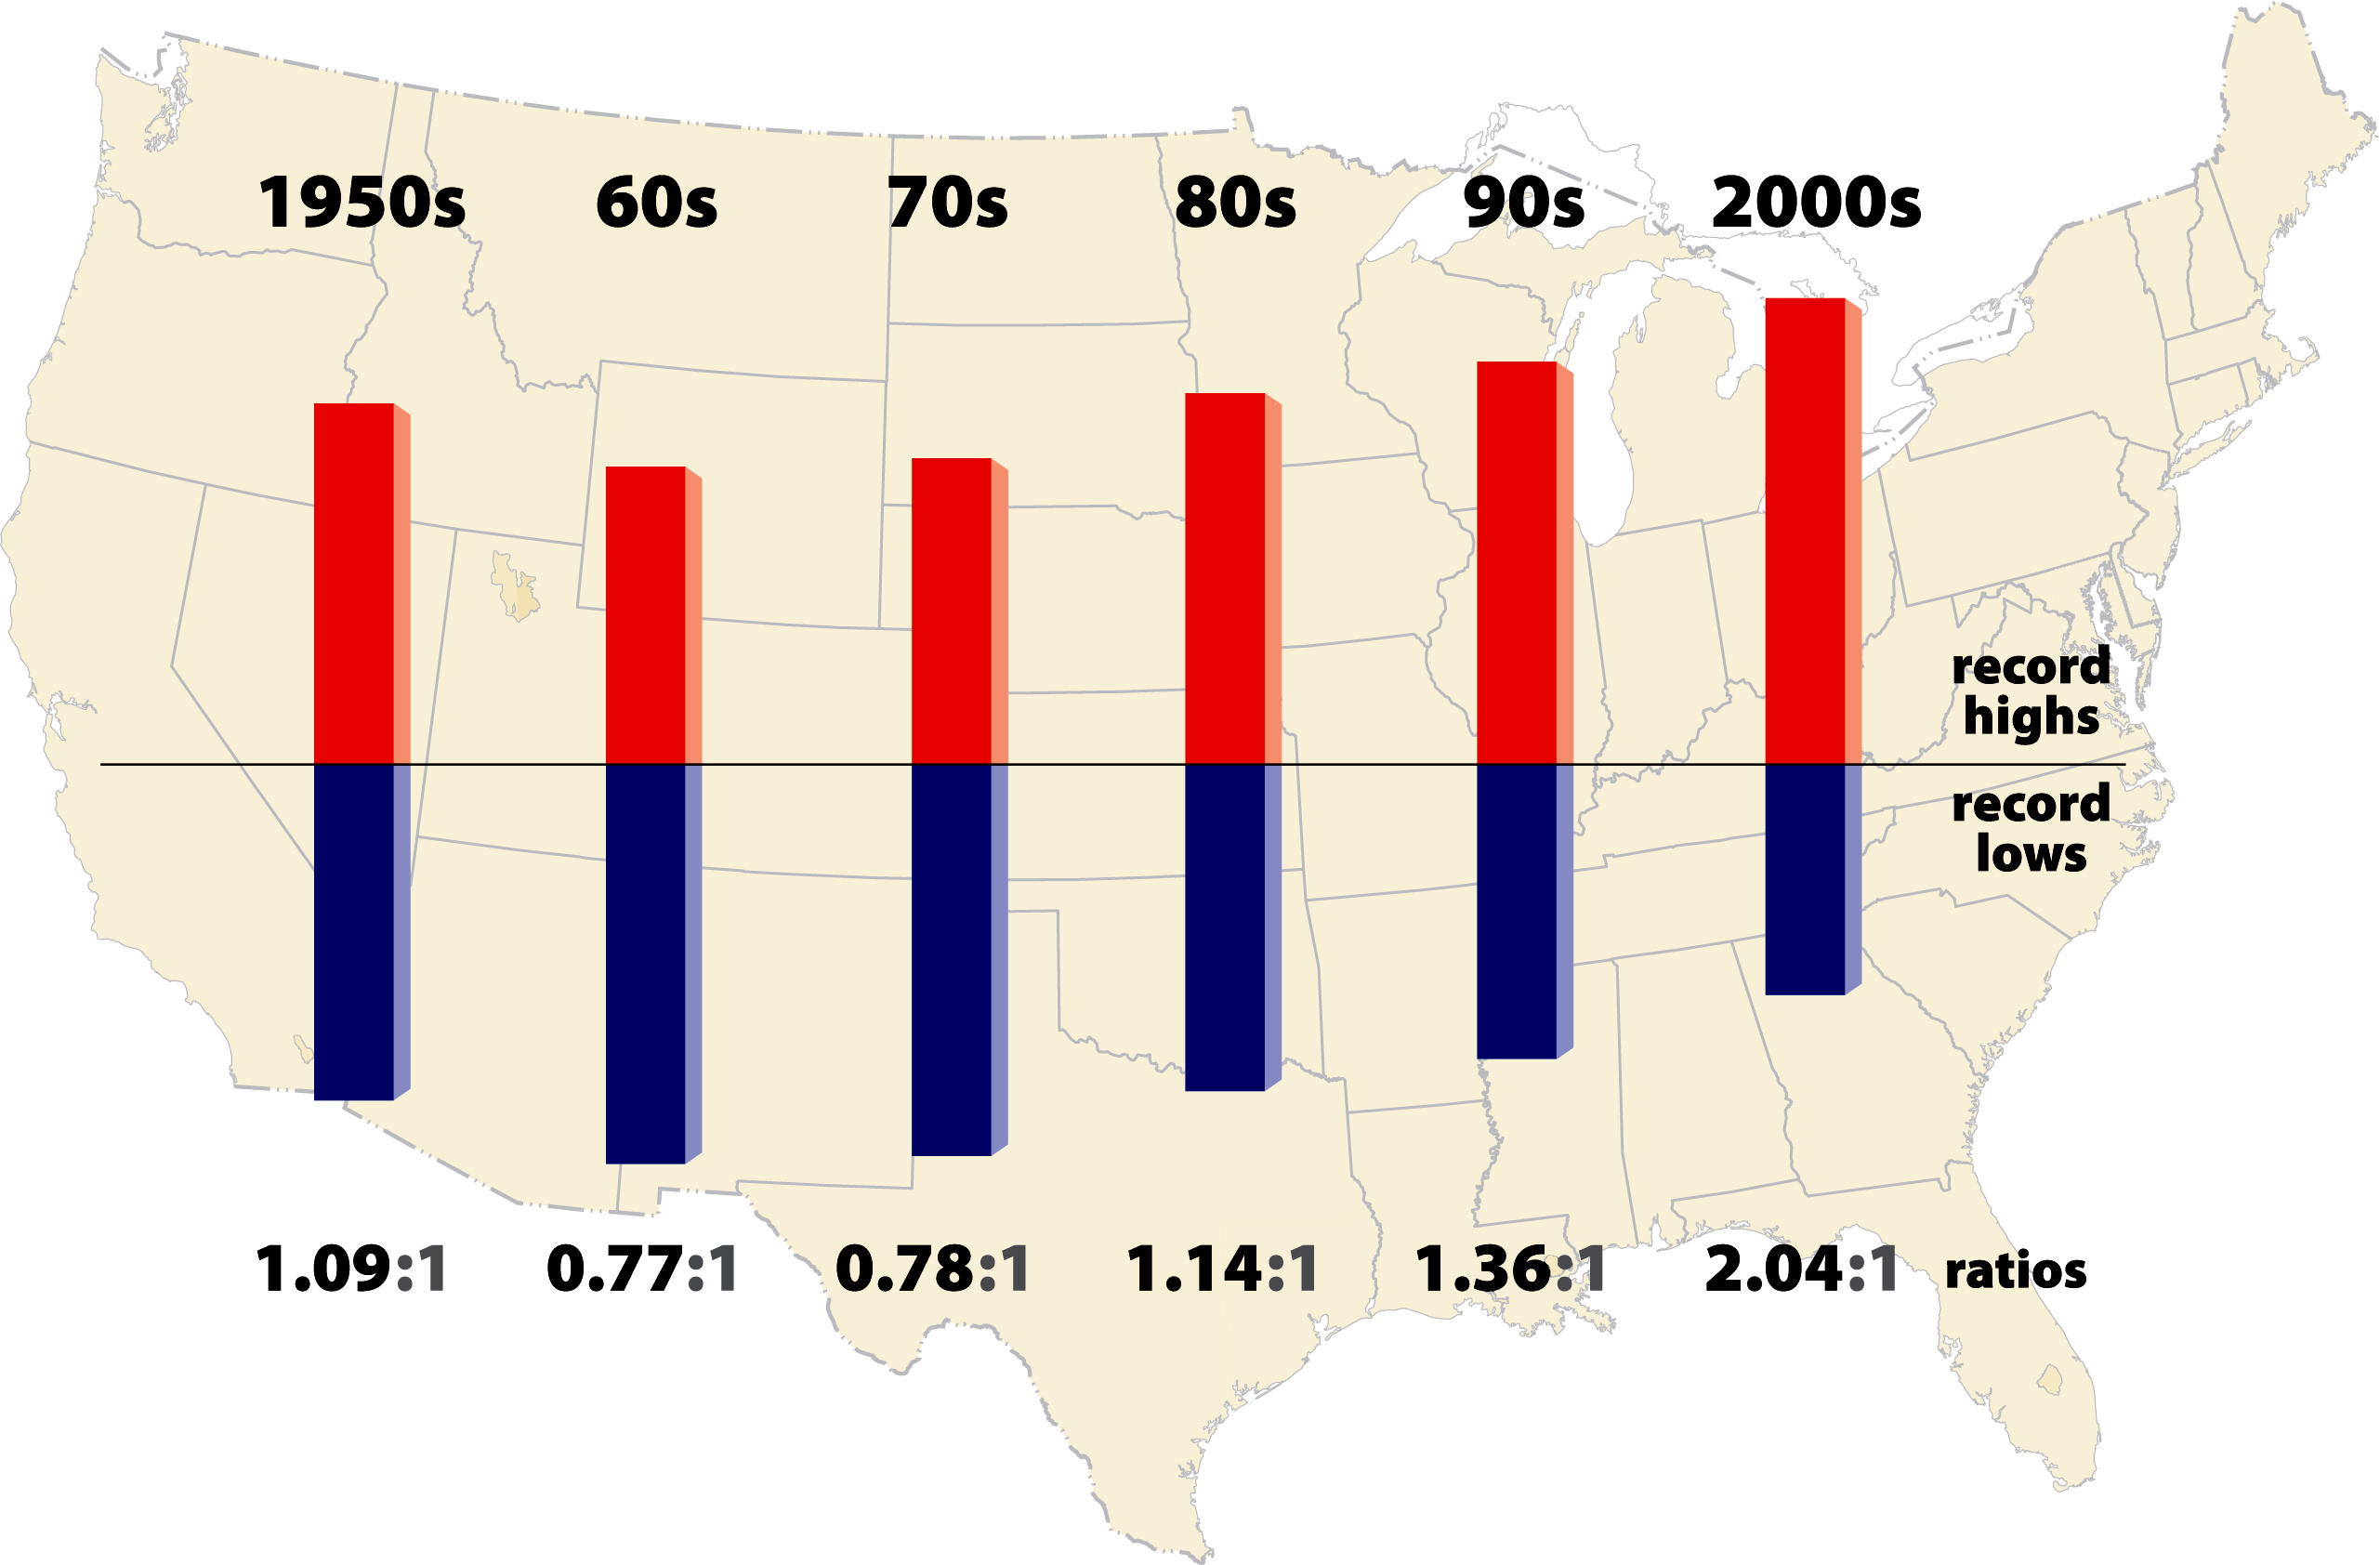 Ratio of daily record highs to daily record lows in the lower 48 United States, from Meehl et al, "Relative increase of record high maximum temperatures compared to record low minimum temperatures in the U.S.," Geophysical Research Letters, 2009.